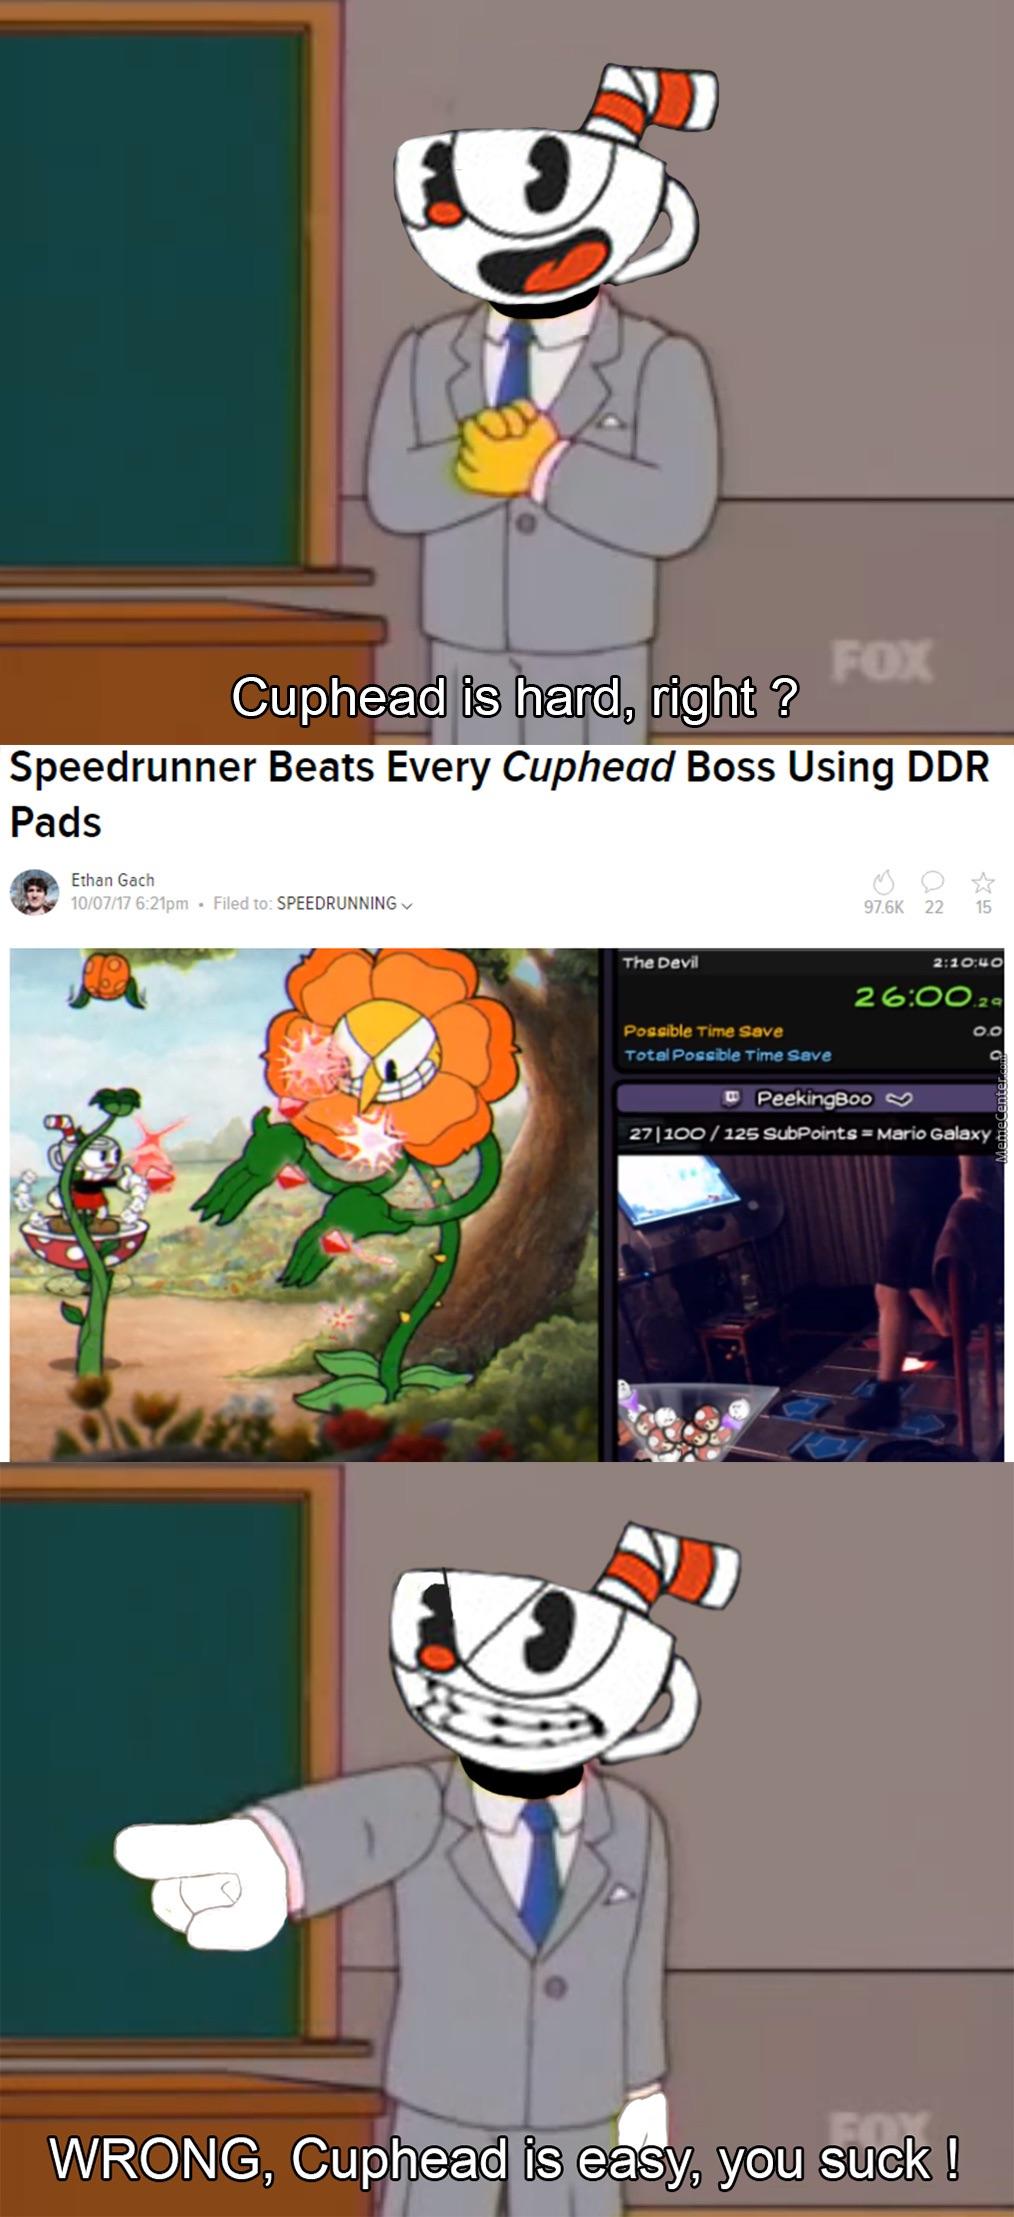 speedrun memes - Fox Cuphead is hard, right? Speedrunner Beats Every Cuphead Boss Using Ddr Pads Ethan Gach 100717 pm Filed to Speedrunning 22 15 The Devil 40 20 0.0 Possible Time Save Total Possible Time Save PeekingBoo 27|100 125 SubPoints Mario G MemeC